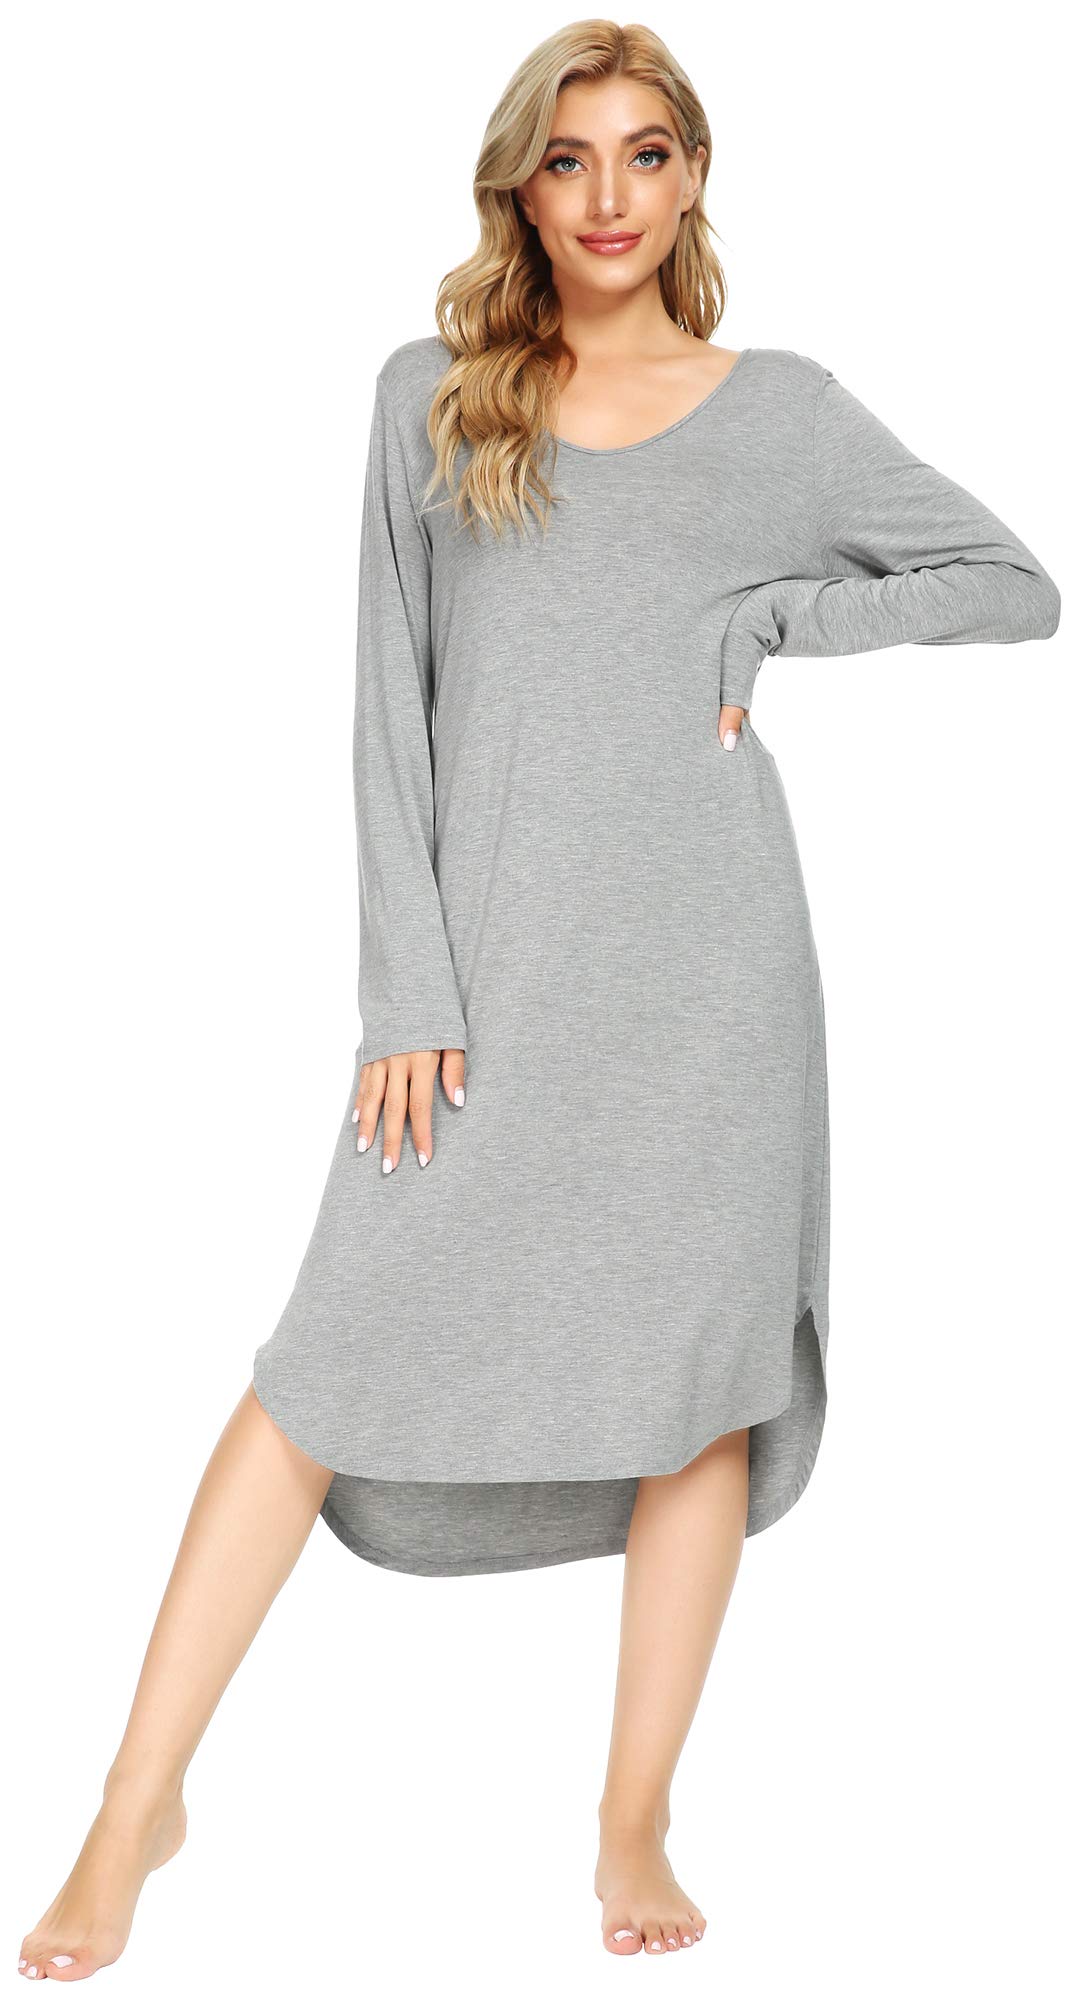 WiWi Bamboo Viscose Nightgowns for Women Soft Long Sleeve